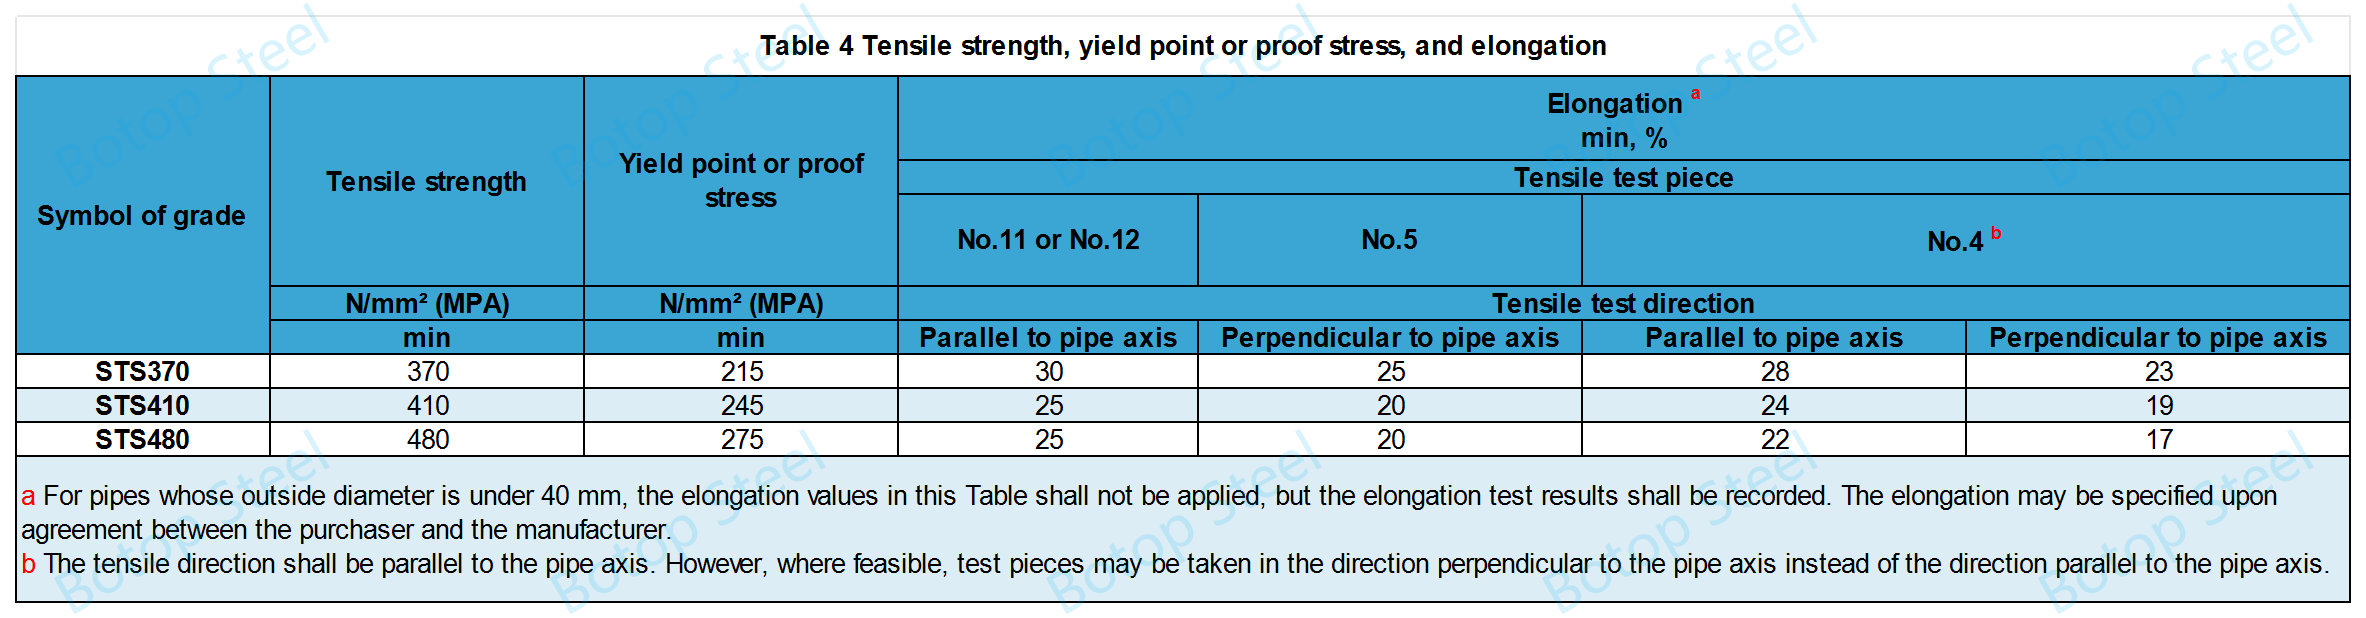 JIS G 3455 Tensile strength, yield point or proof stress, and elongation